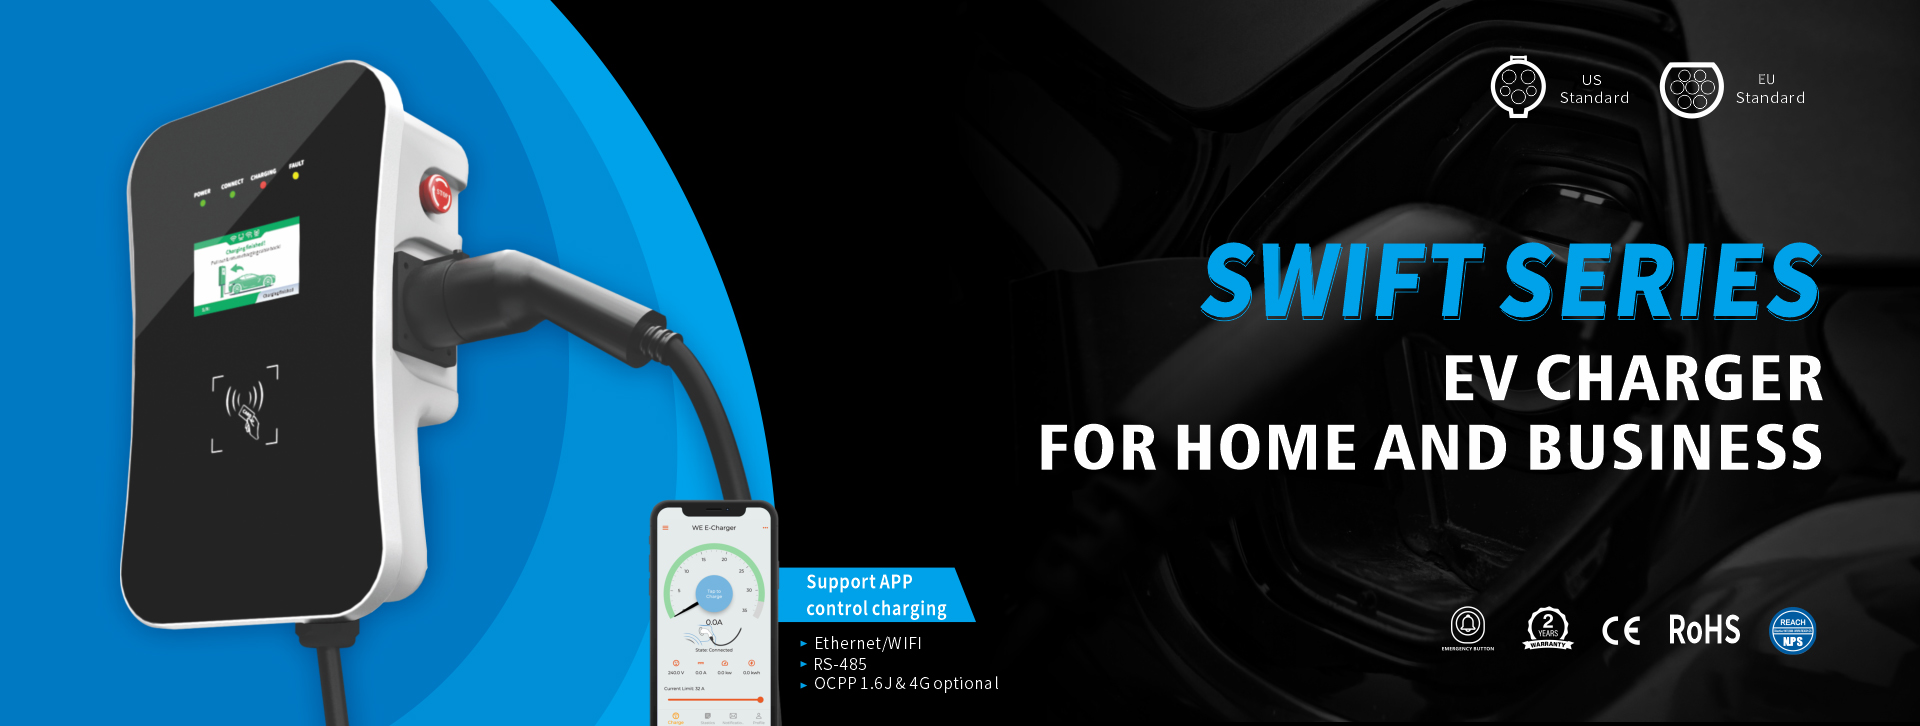 Swift Series Home/Business Charging